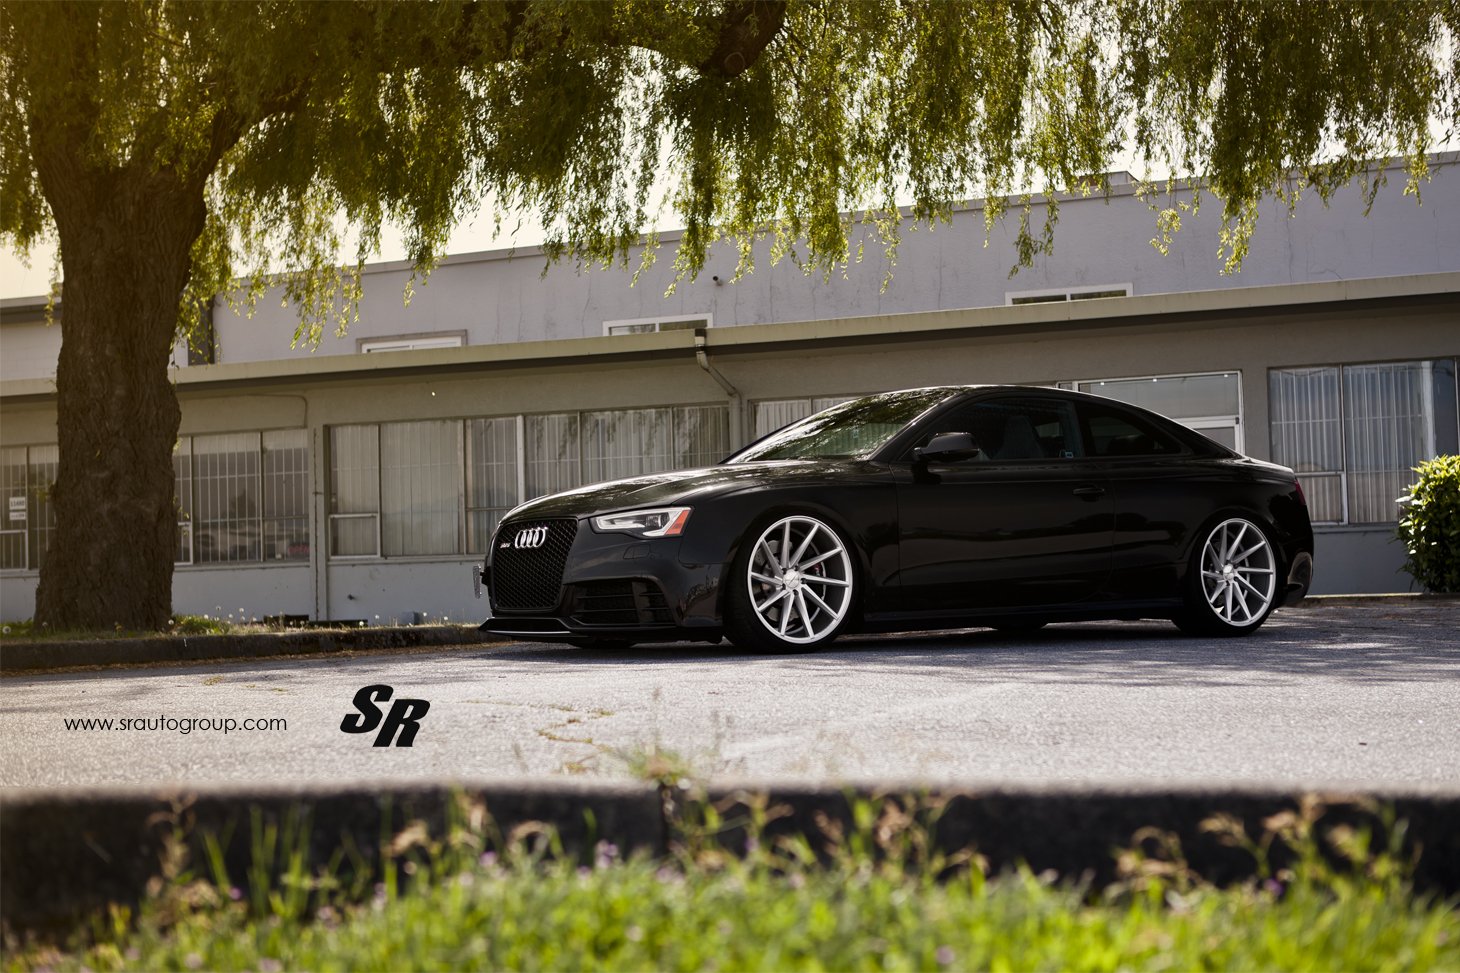 rs5, Audi, Coupe, Black, Vossen, Wheels, Cars, Tuning Wallpaper